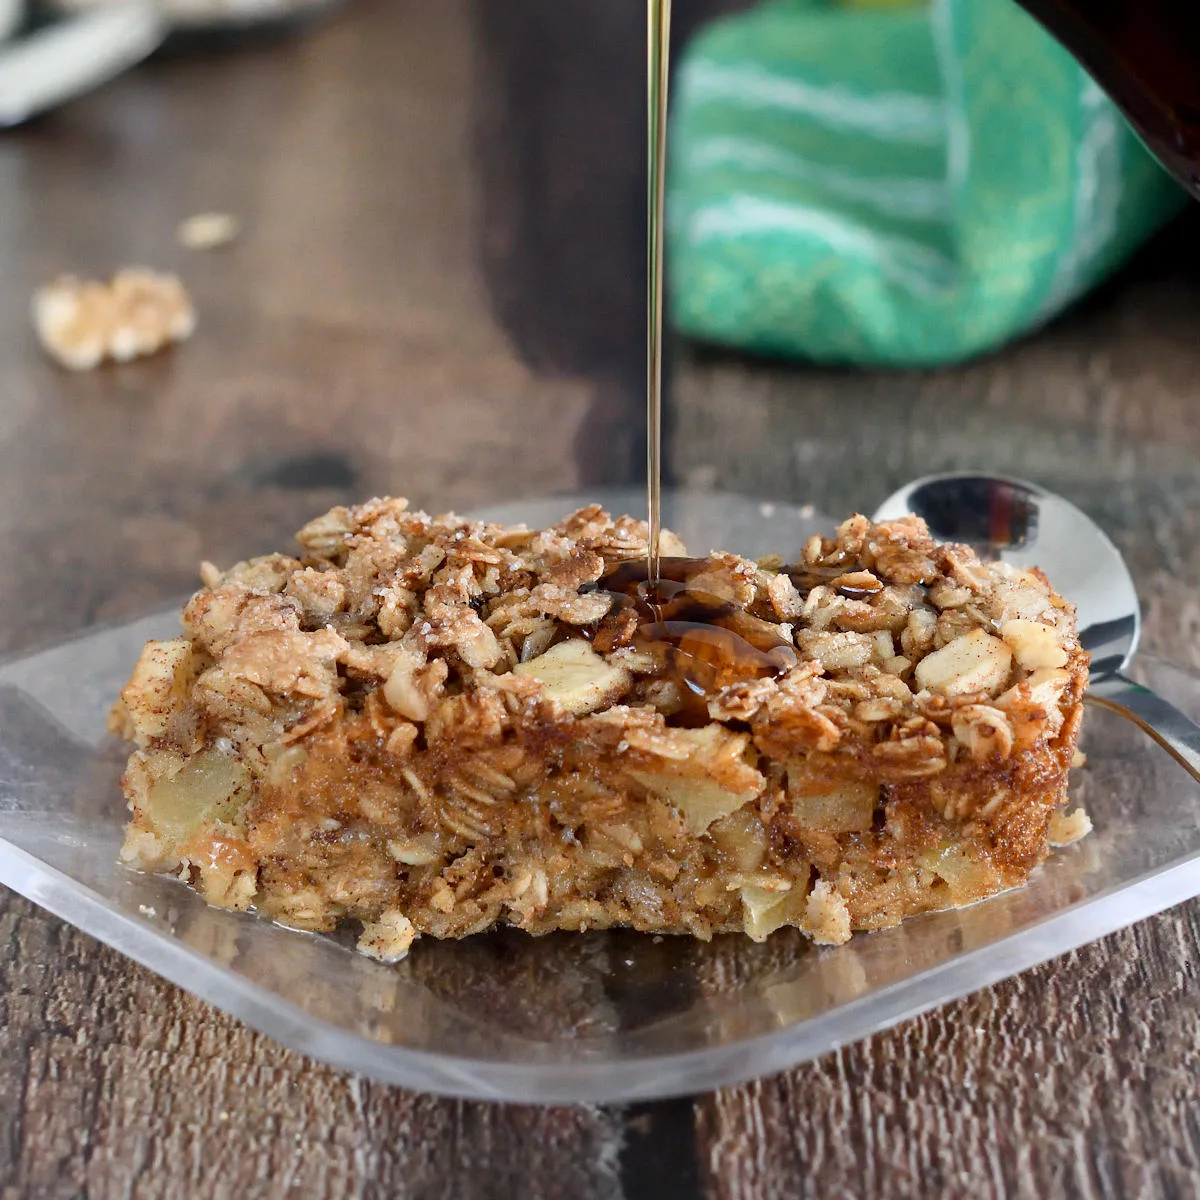 a slice of apple maple baked oatmeal on a plate being drizzled with maple syrup